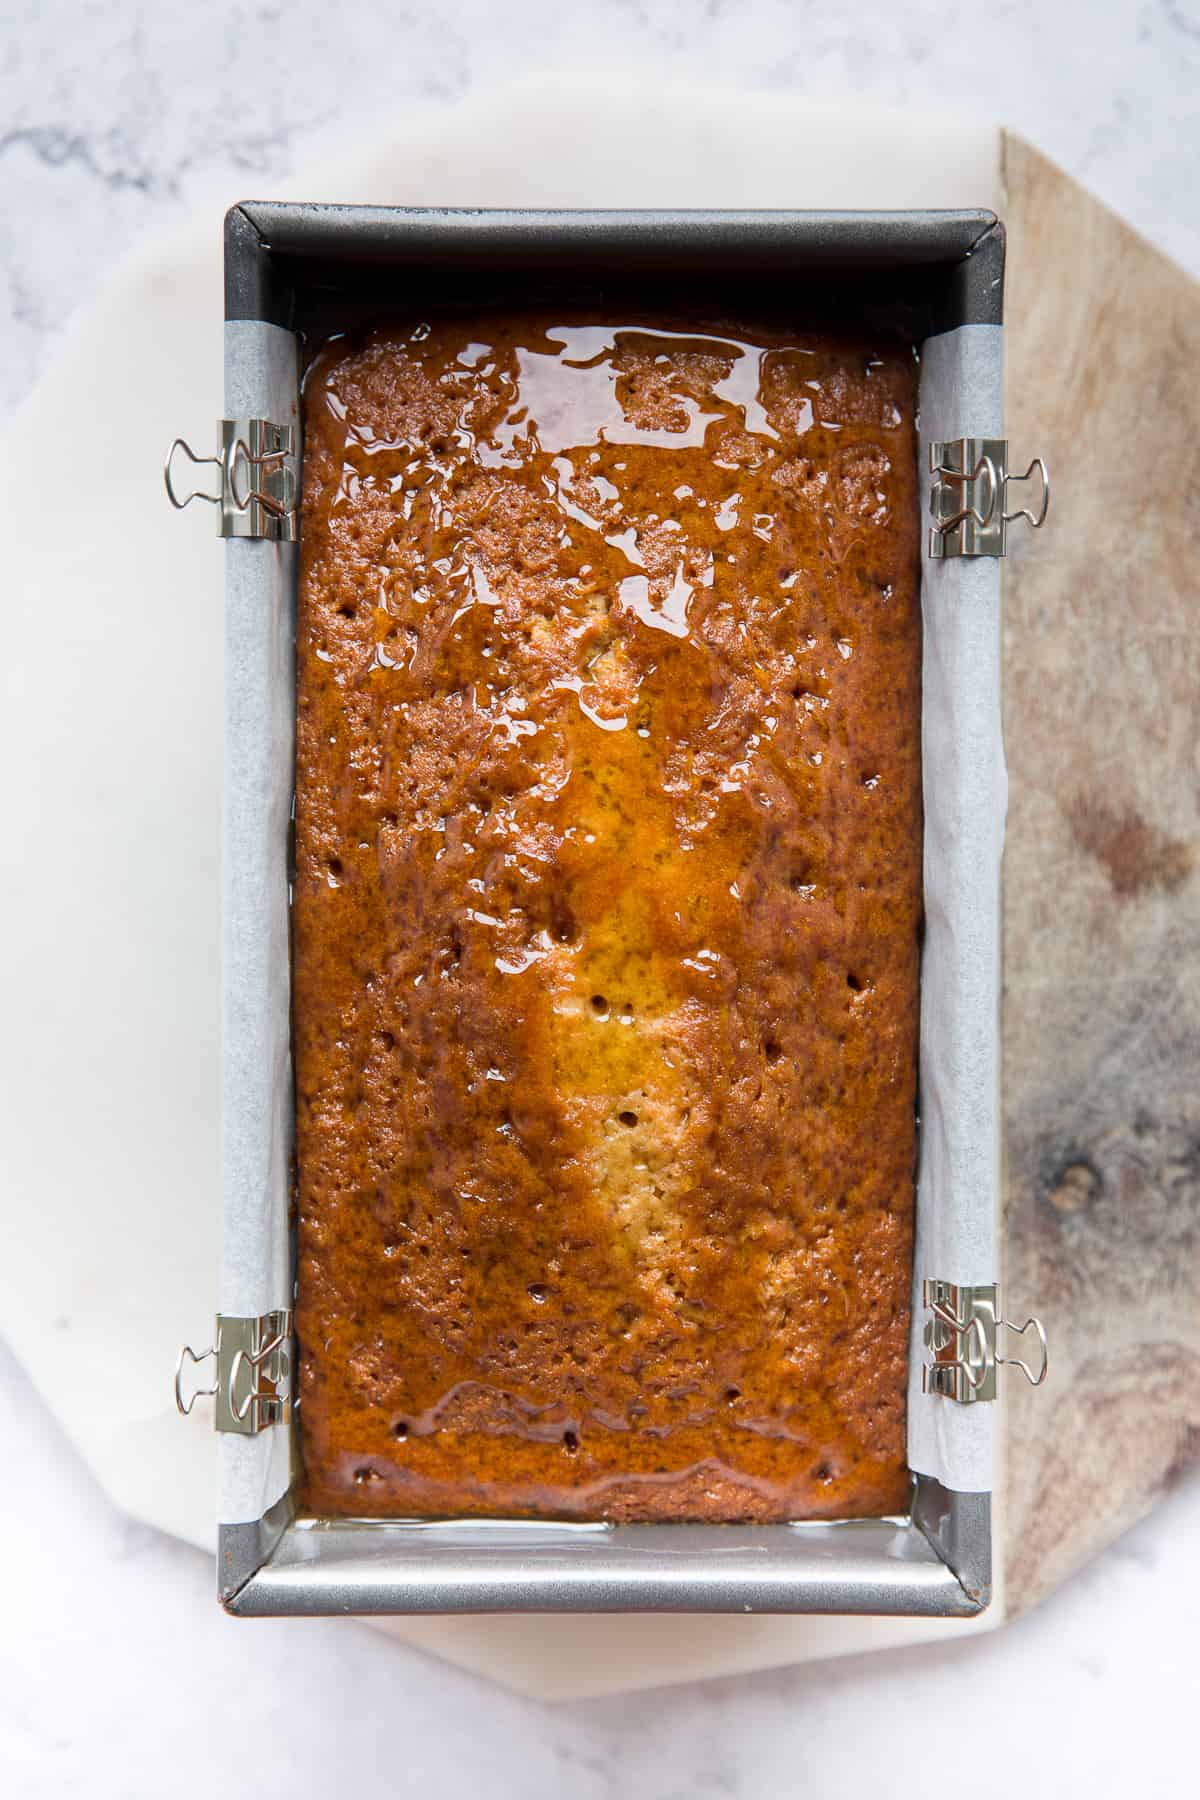 A baked Syrup loaf Cake that has just had syrup poured on top of it. 